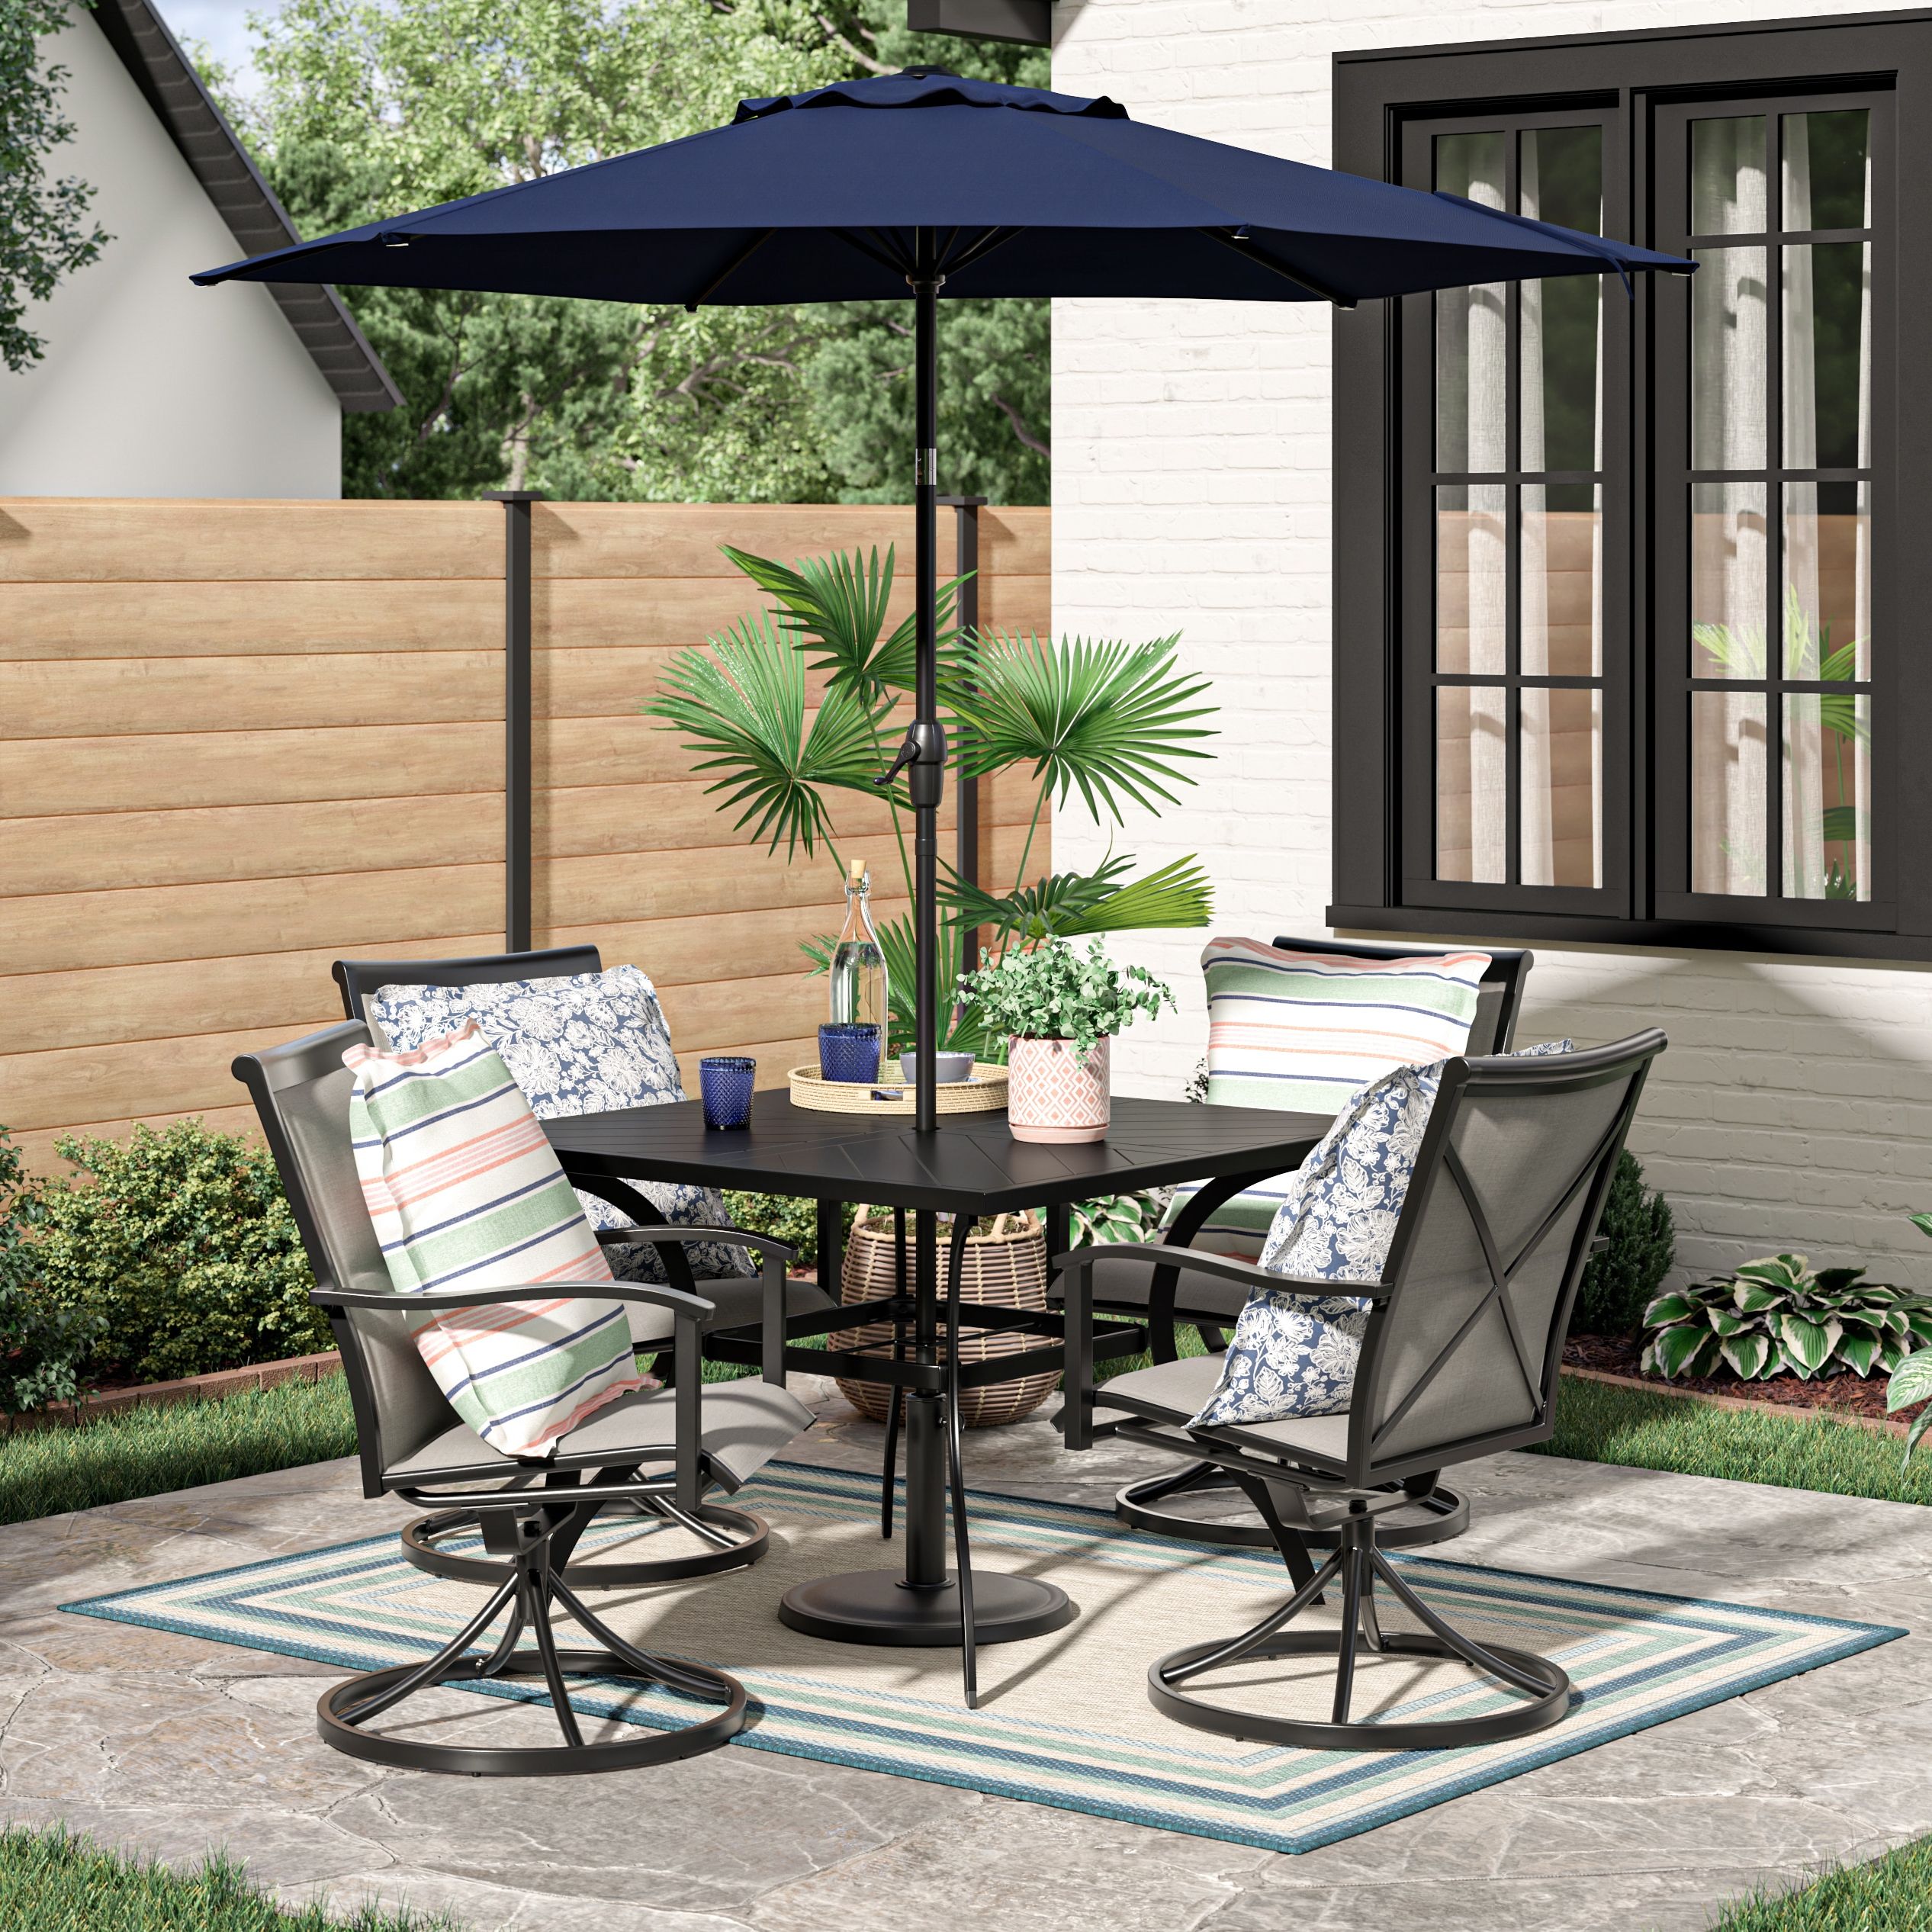 5 Piece Patio Furniture Set Within Most Up To Date Shop Style Selections Melrose 5 Piece Patio Dining Set At Lowes (View 13 of 15)